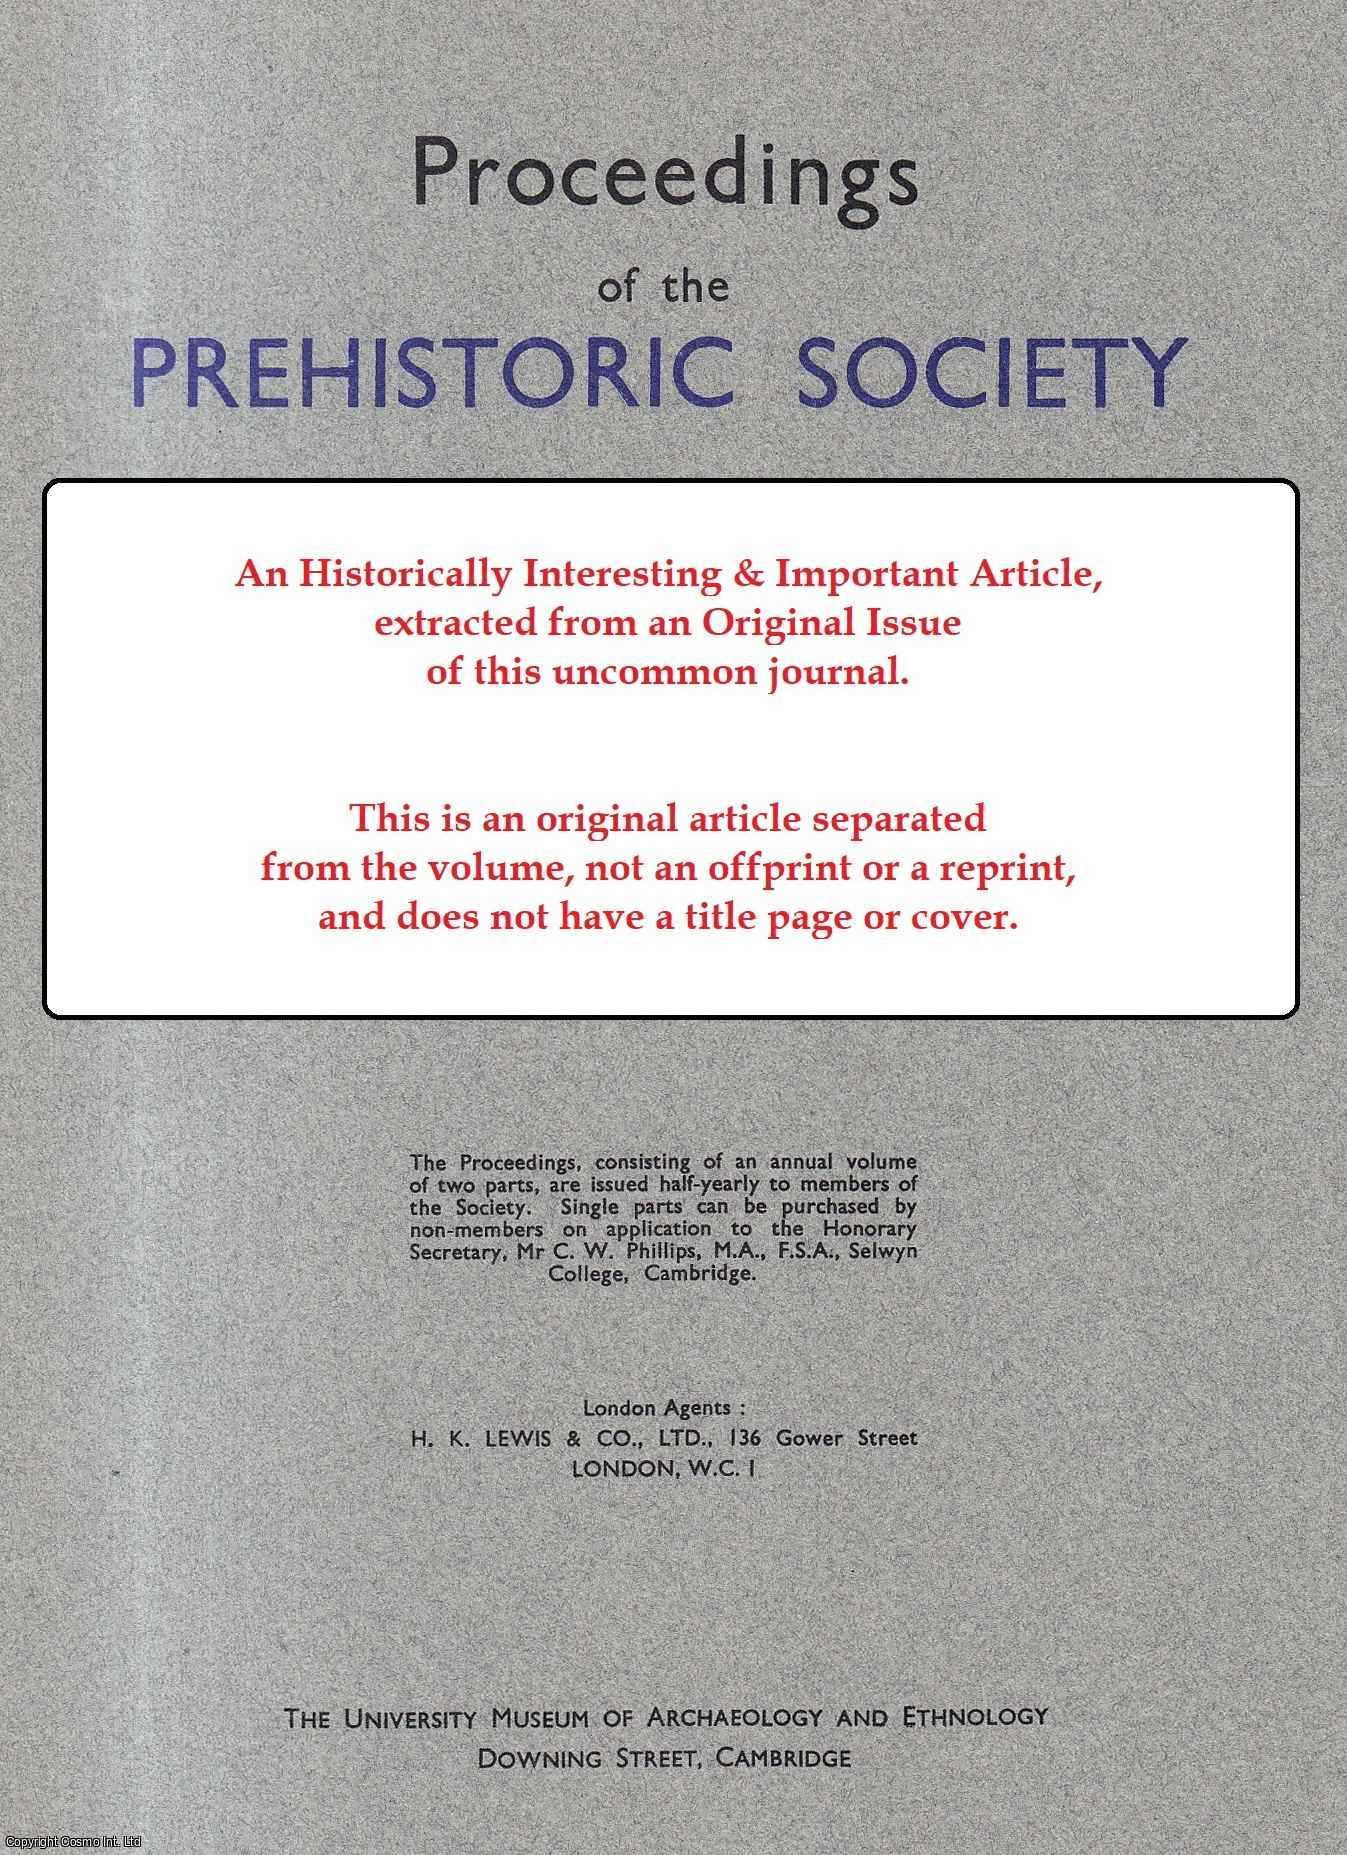 T. Douglas Price - Thermal Alteration in Mesolithic Assemblages. An original article from Proceedings of the Prehistoric Society, 1982.